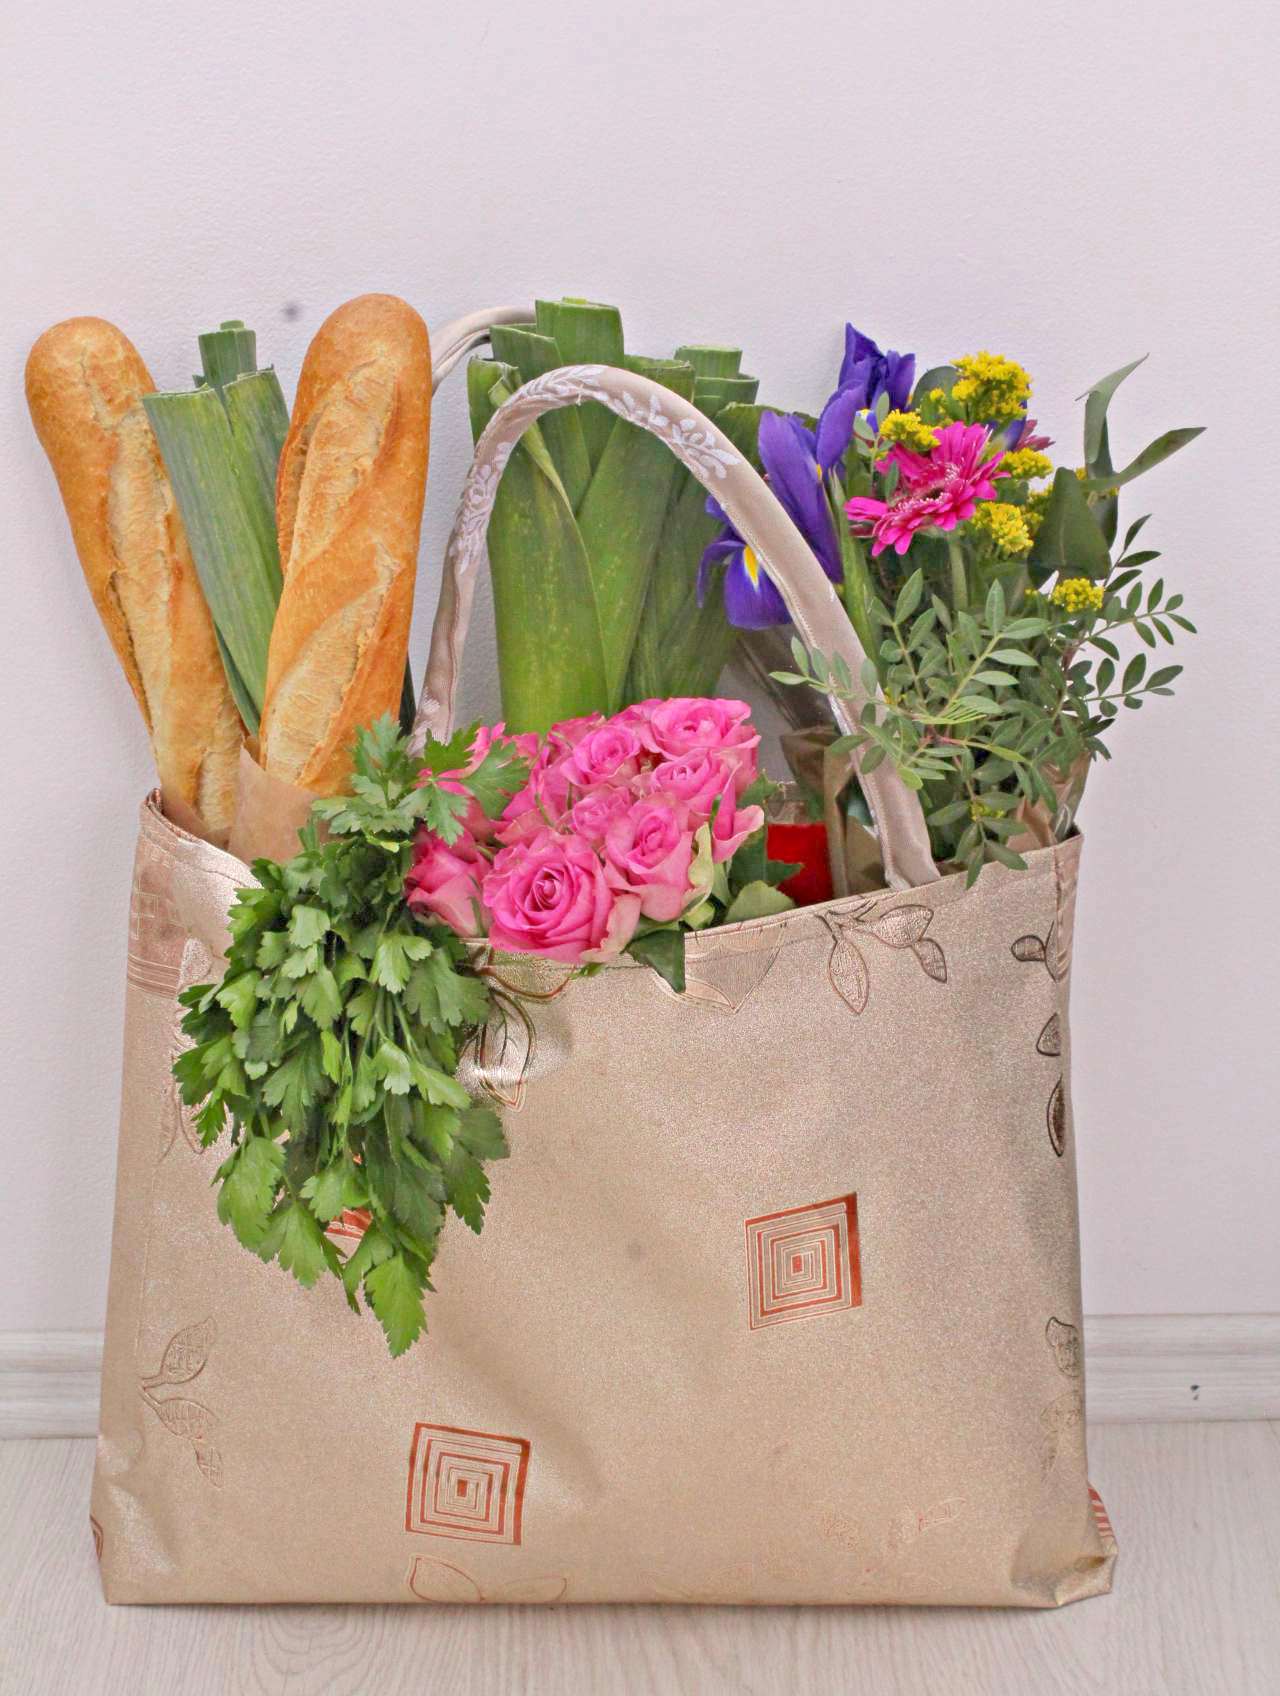 Learn how to make a reusable tote bag that is reversible, sturdy, roomy and durable with this grocery bag pattern! This is the easiest method for making a tote bag!